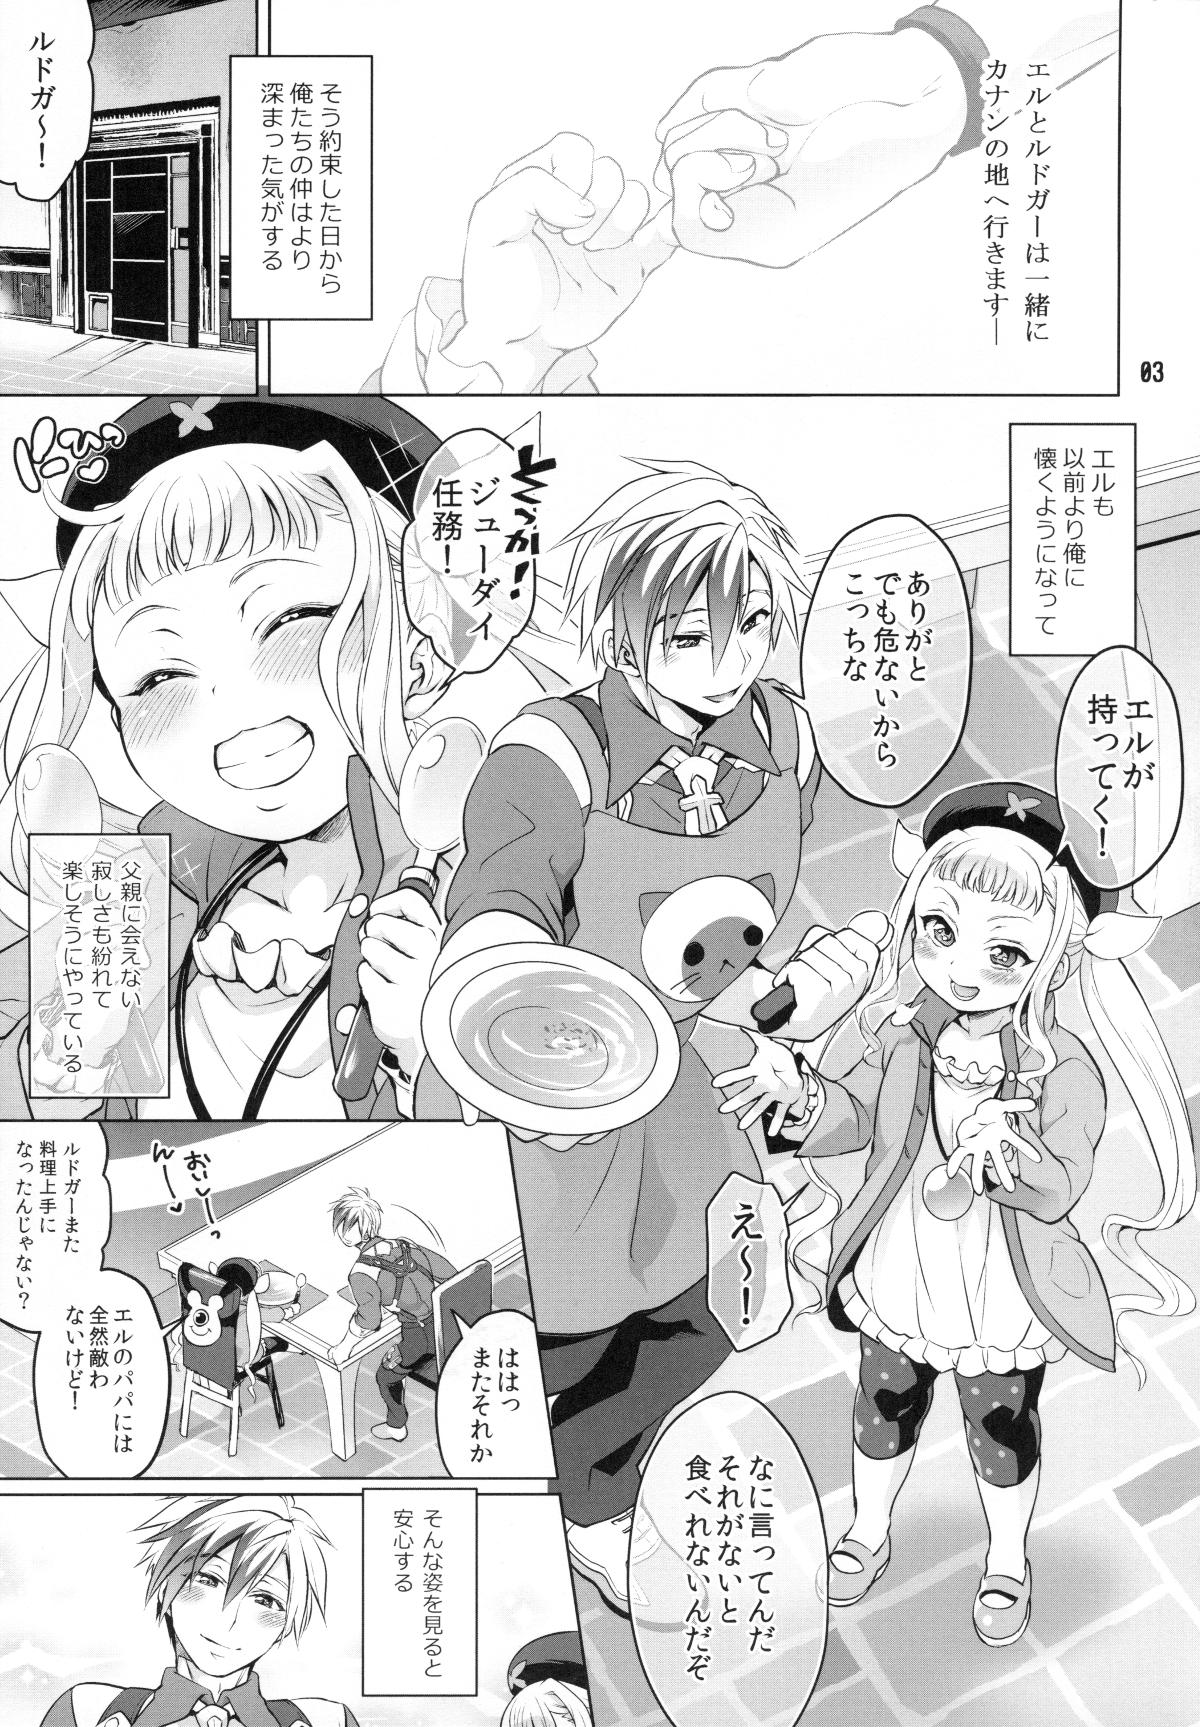 Girl On Girl Futanari Elle to Ludger no Aibou Soup - Tales of xillia Blow Jobs - Page 2